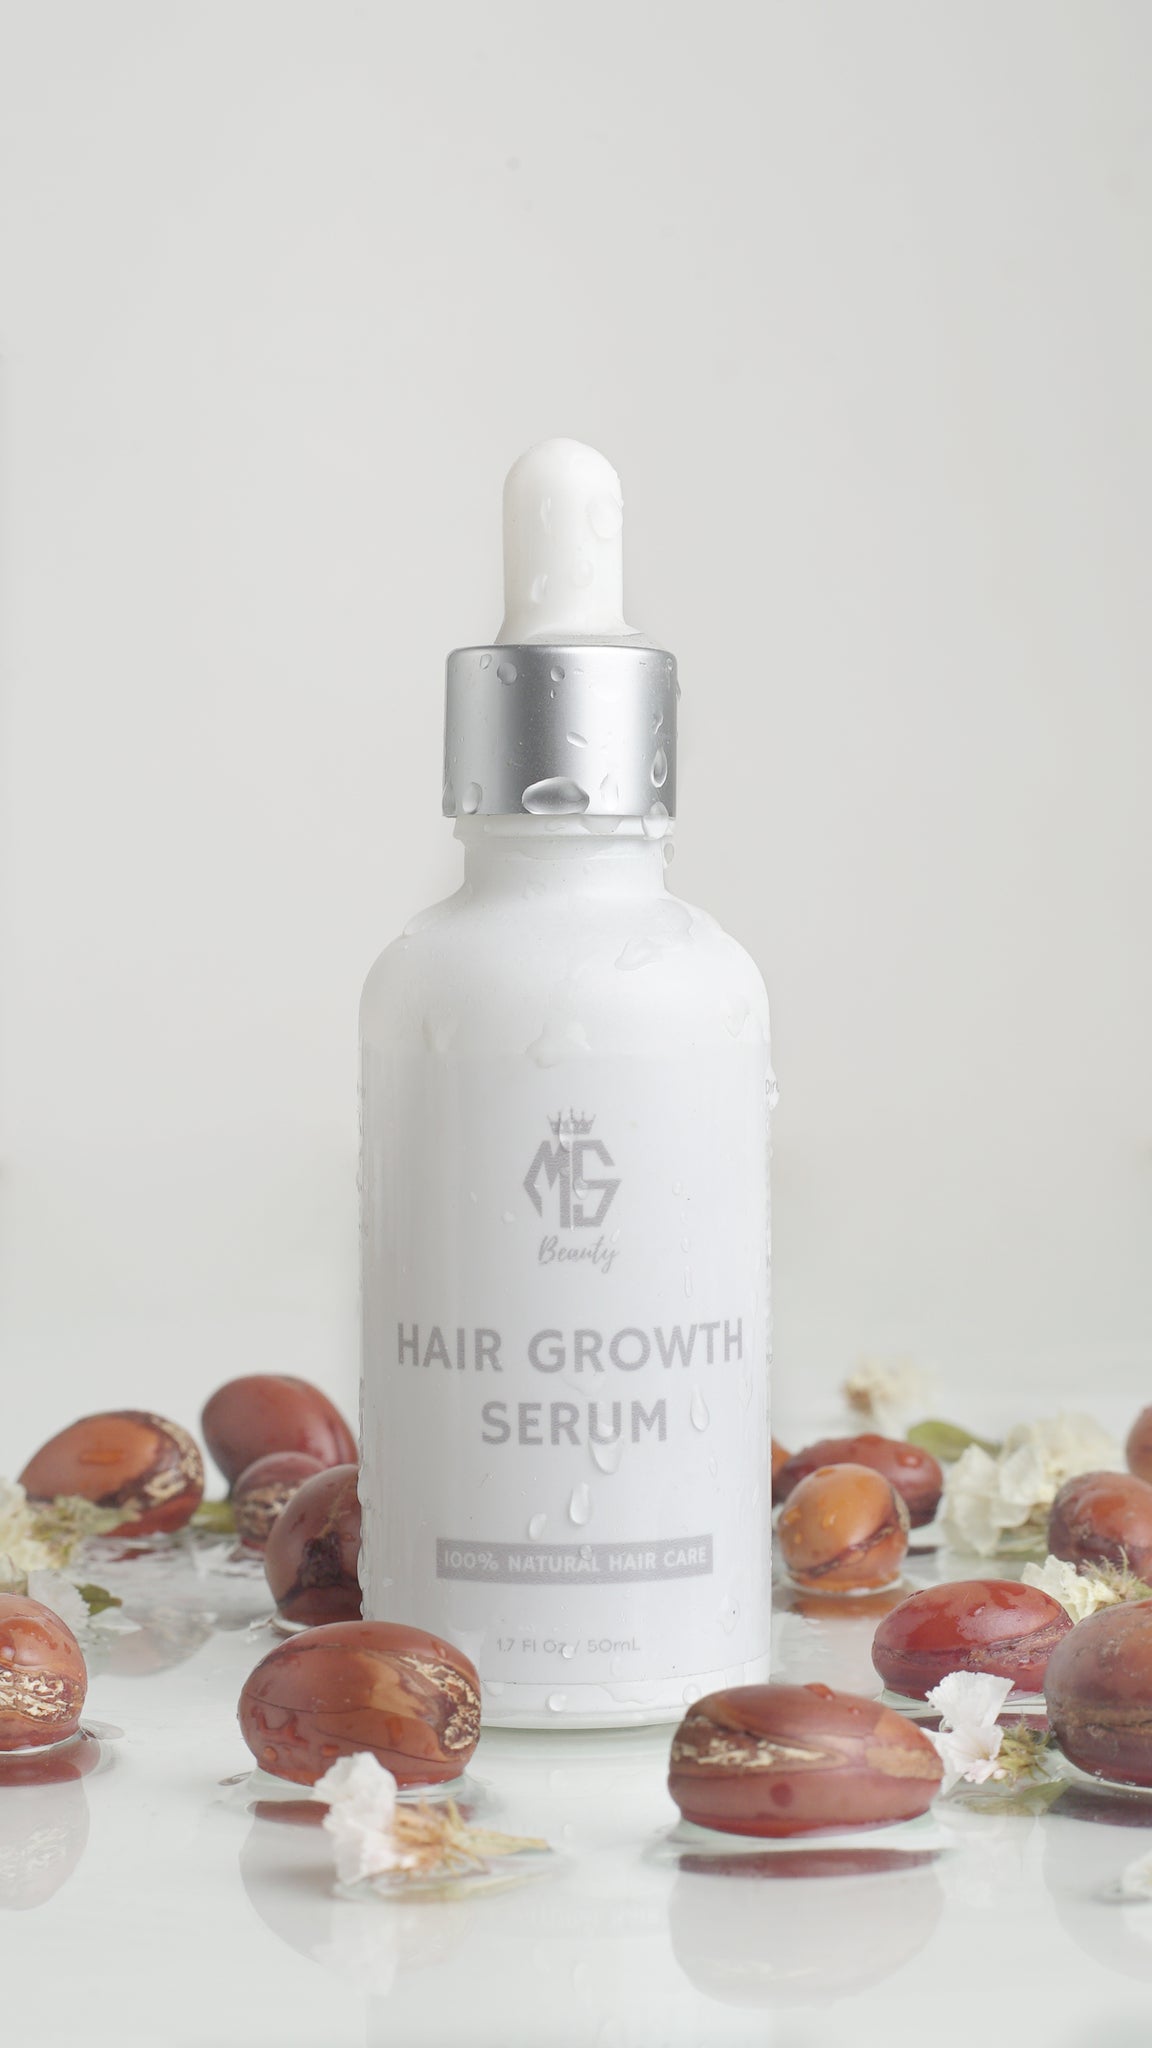 Hair Growth Serum, all-natural, cold-pressed oils, certified Argan Oil, Castor Oil, Rosemary, nourishing ingredients, fuller, thicker, stronger, natural shine, premium quality, gentle, free from harmful chemicals, vibrant, radiant locks.